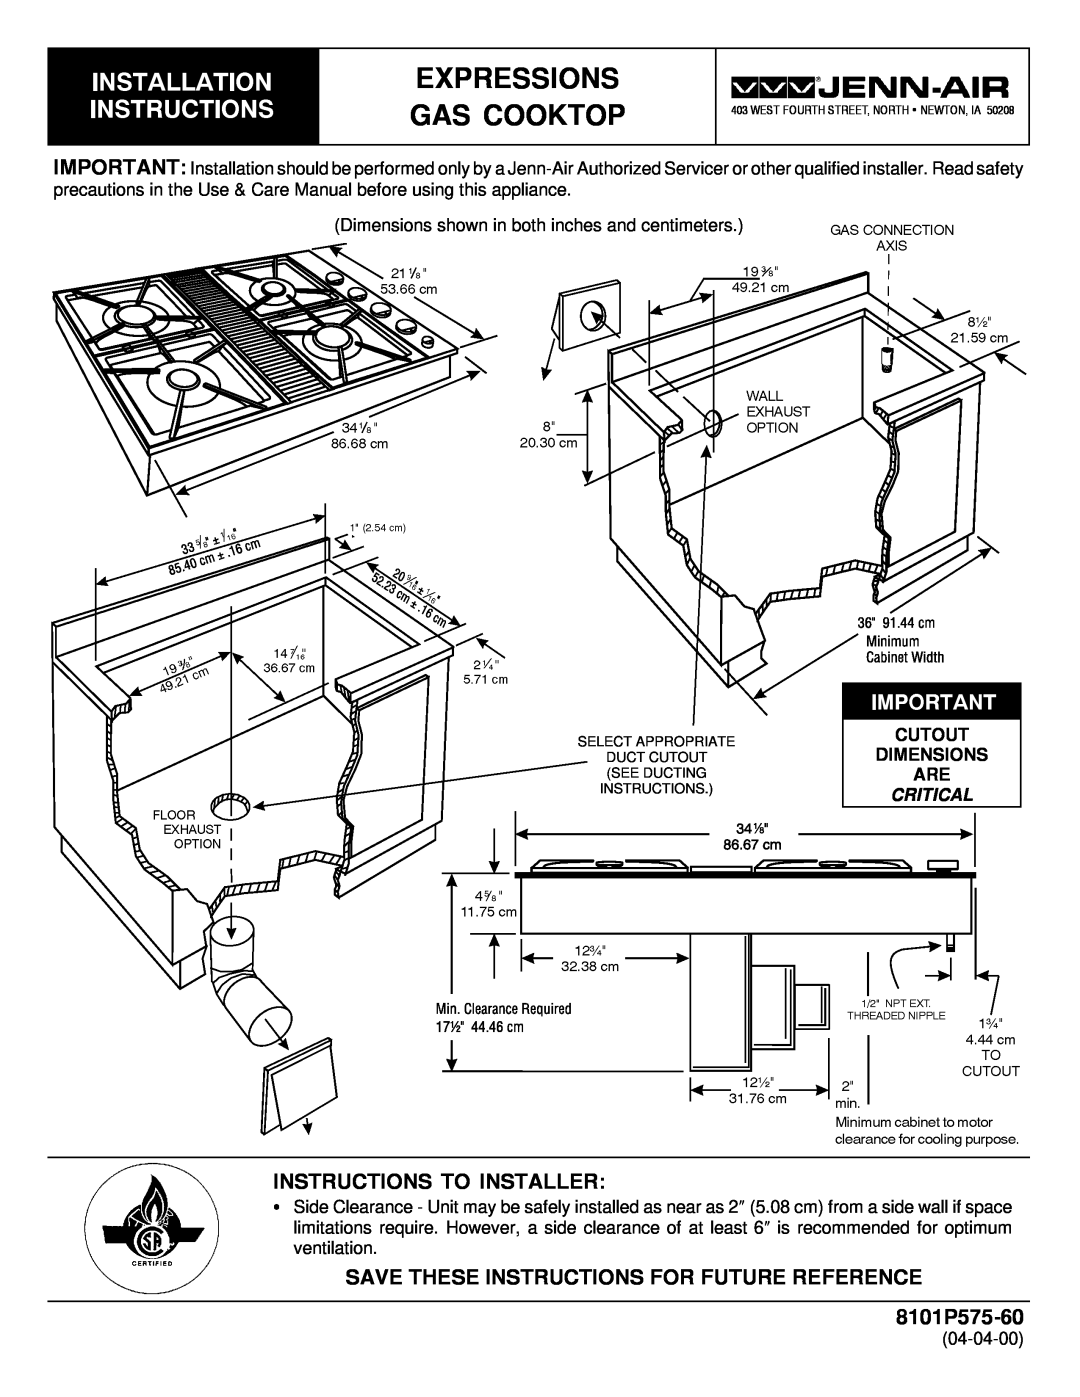 Jenn-Air 8101P575-60 dimensions Expressions Gas Cooktop, Instructions To Installer, Cutout Dimensions Are, Critical 